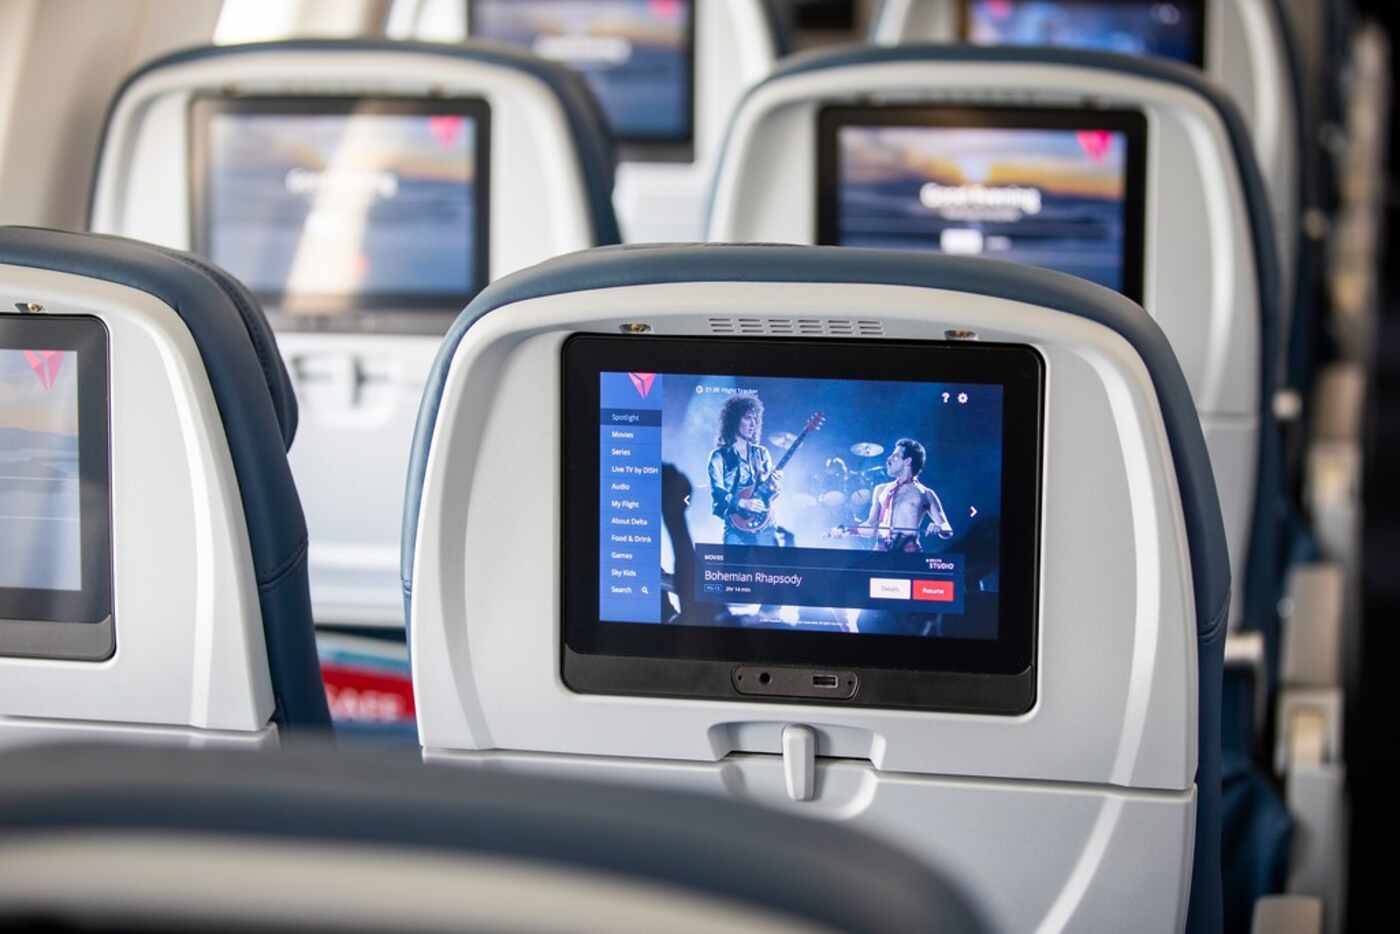 Seatback entertainment screens on the Airbus A220.